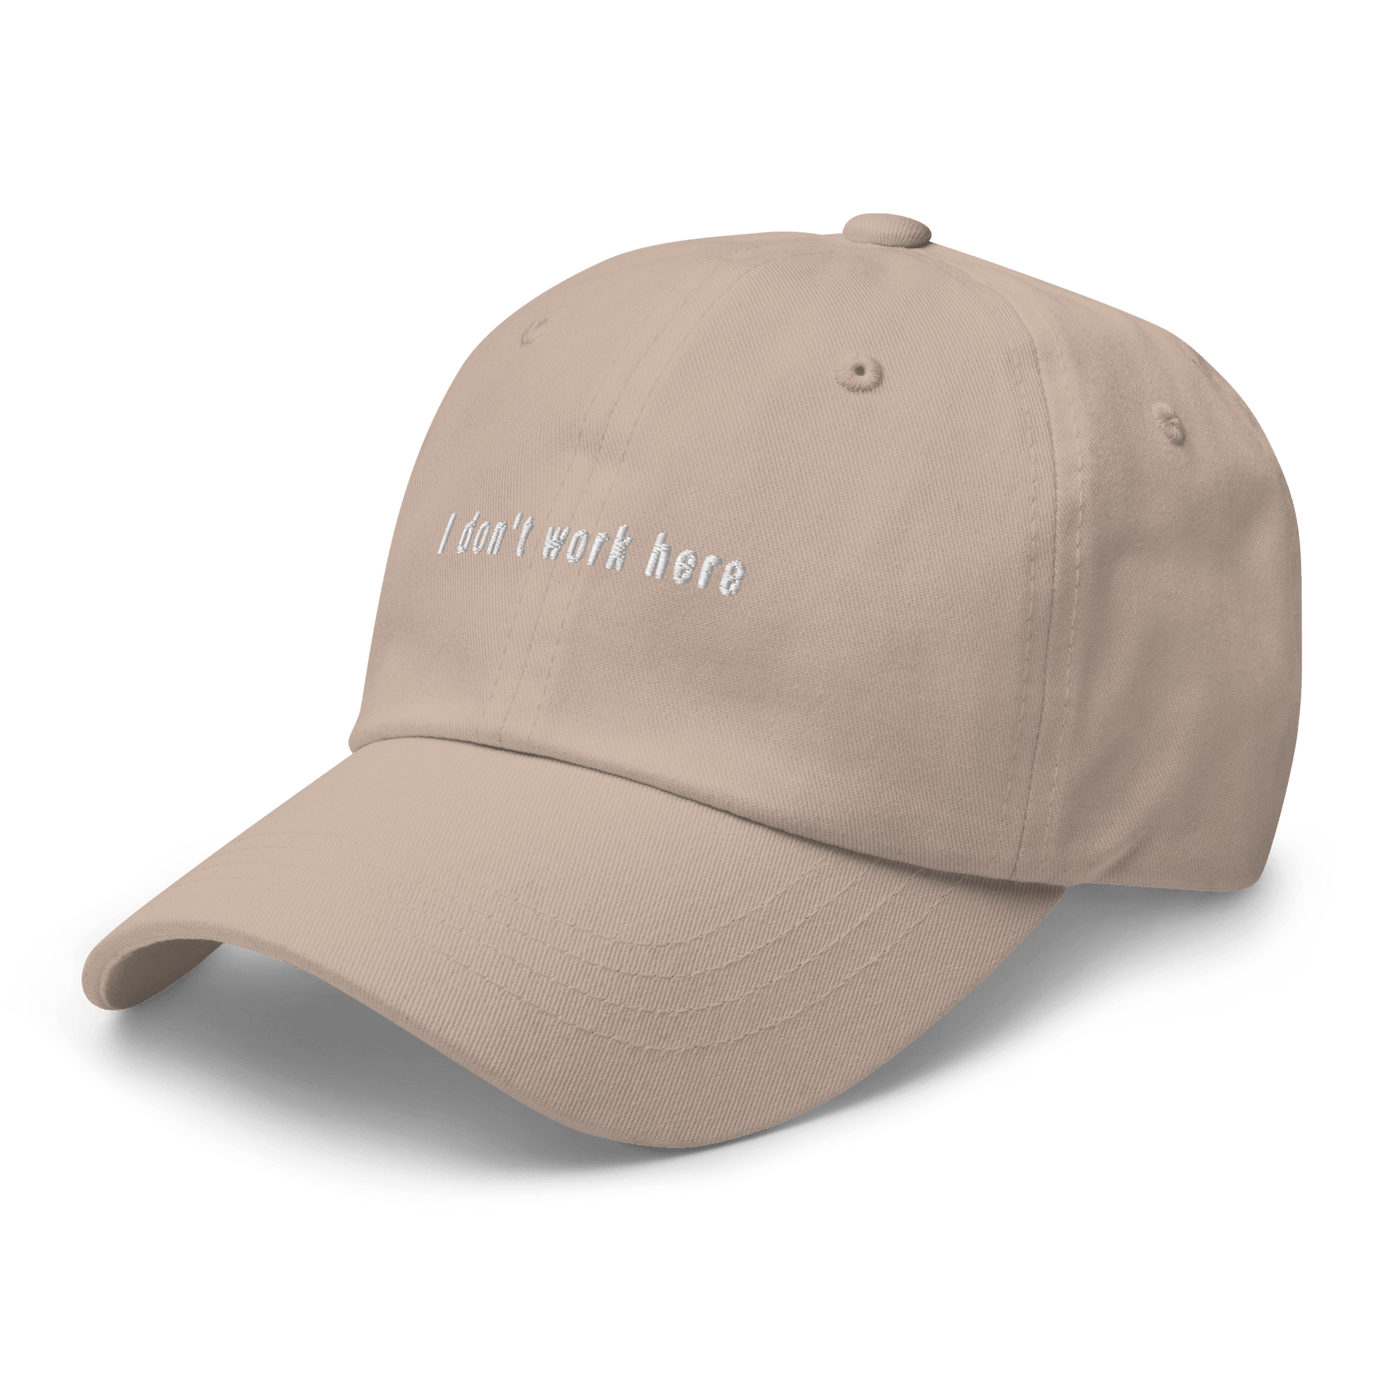 I don't work here Dad hat - Stone - - Just Another Cap Store